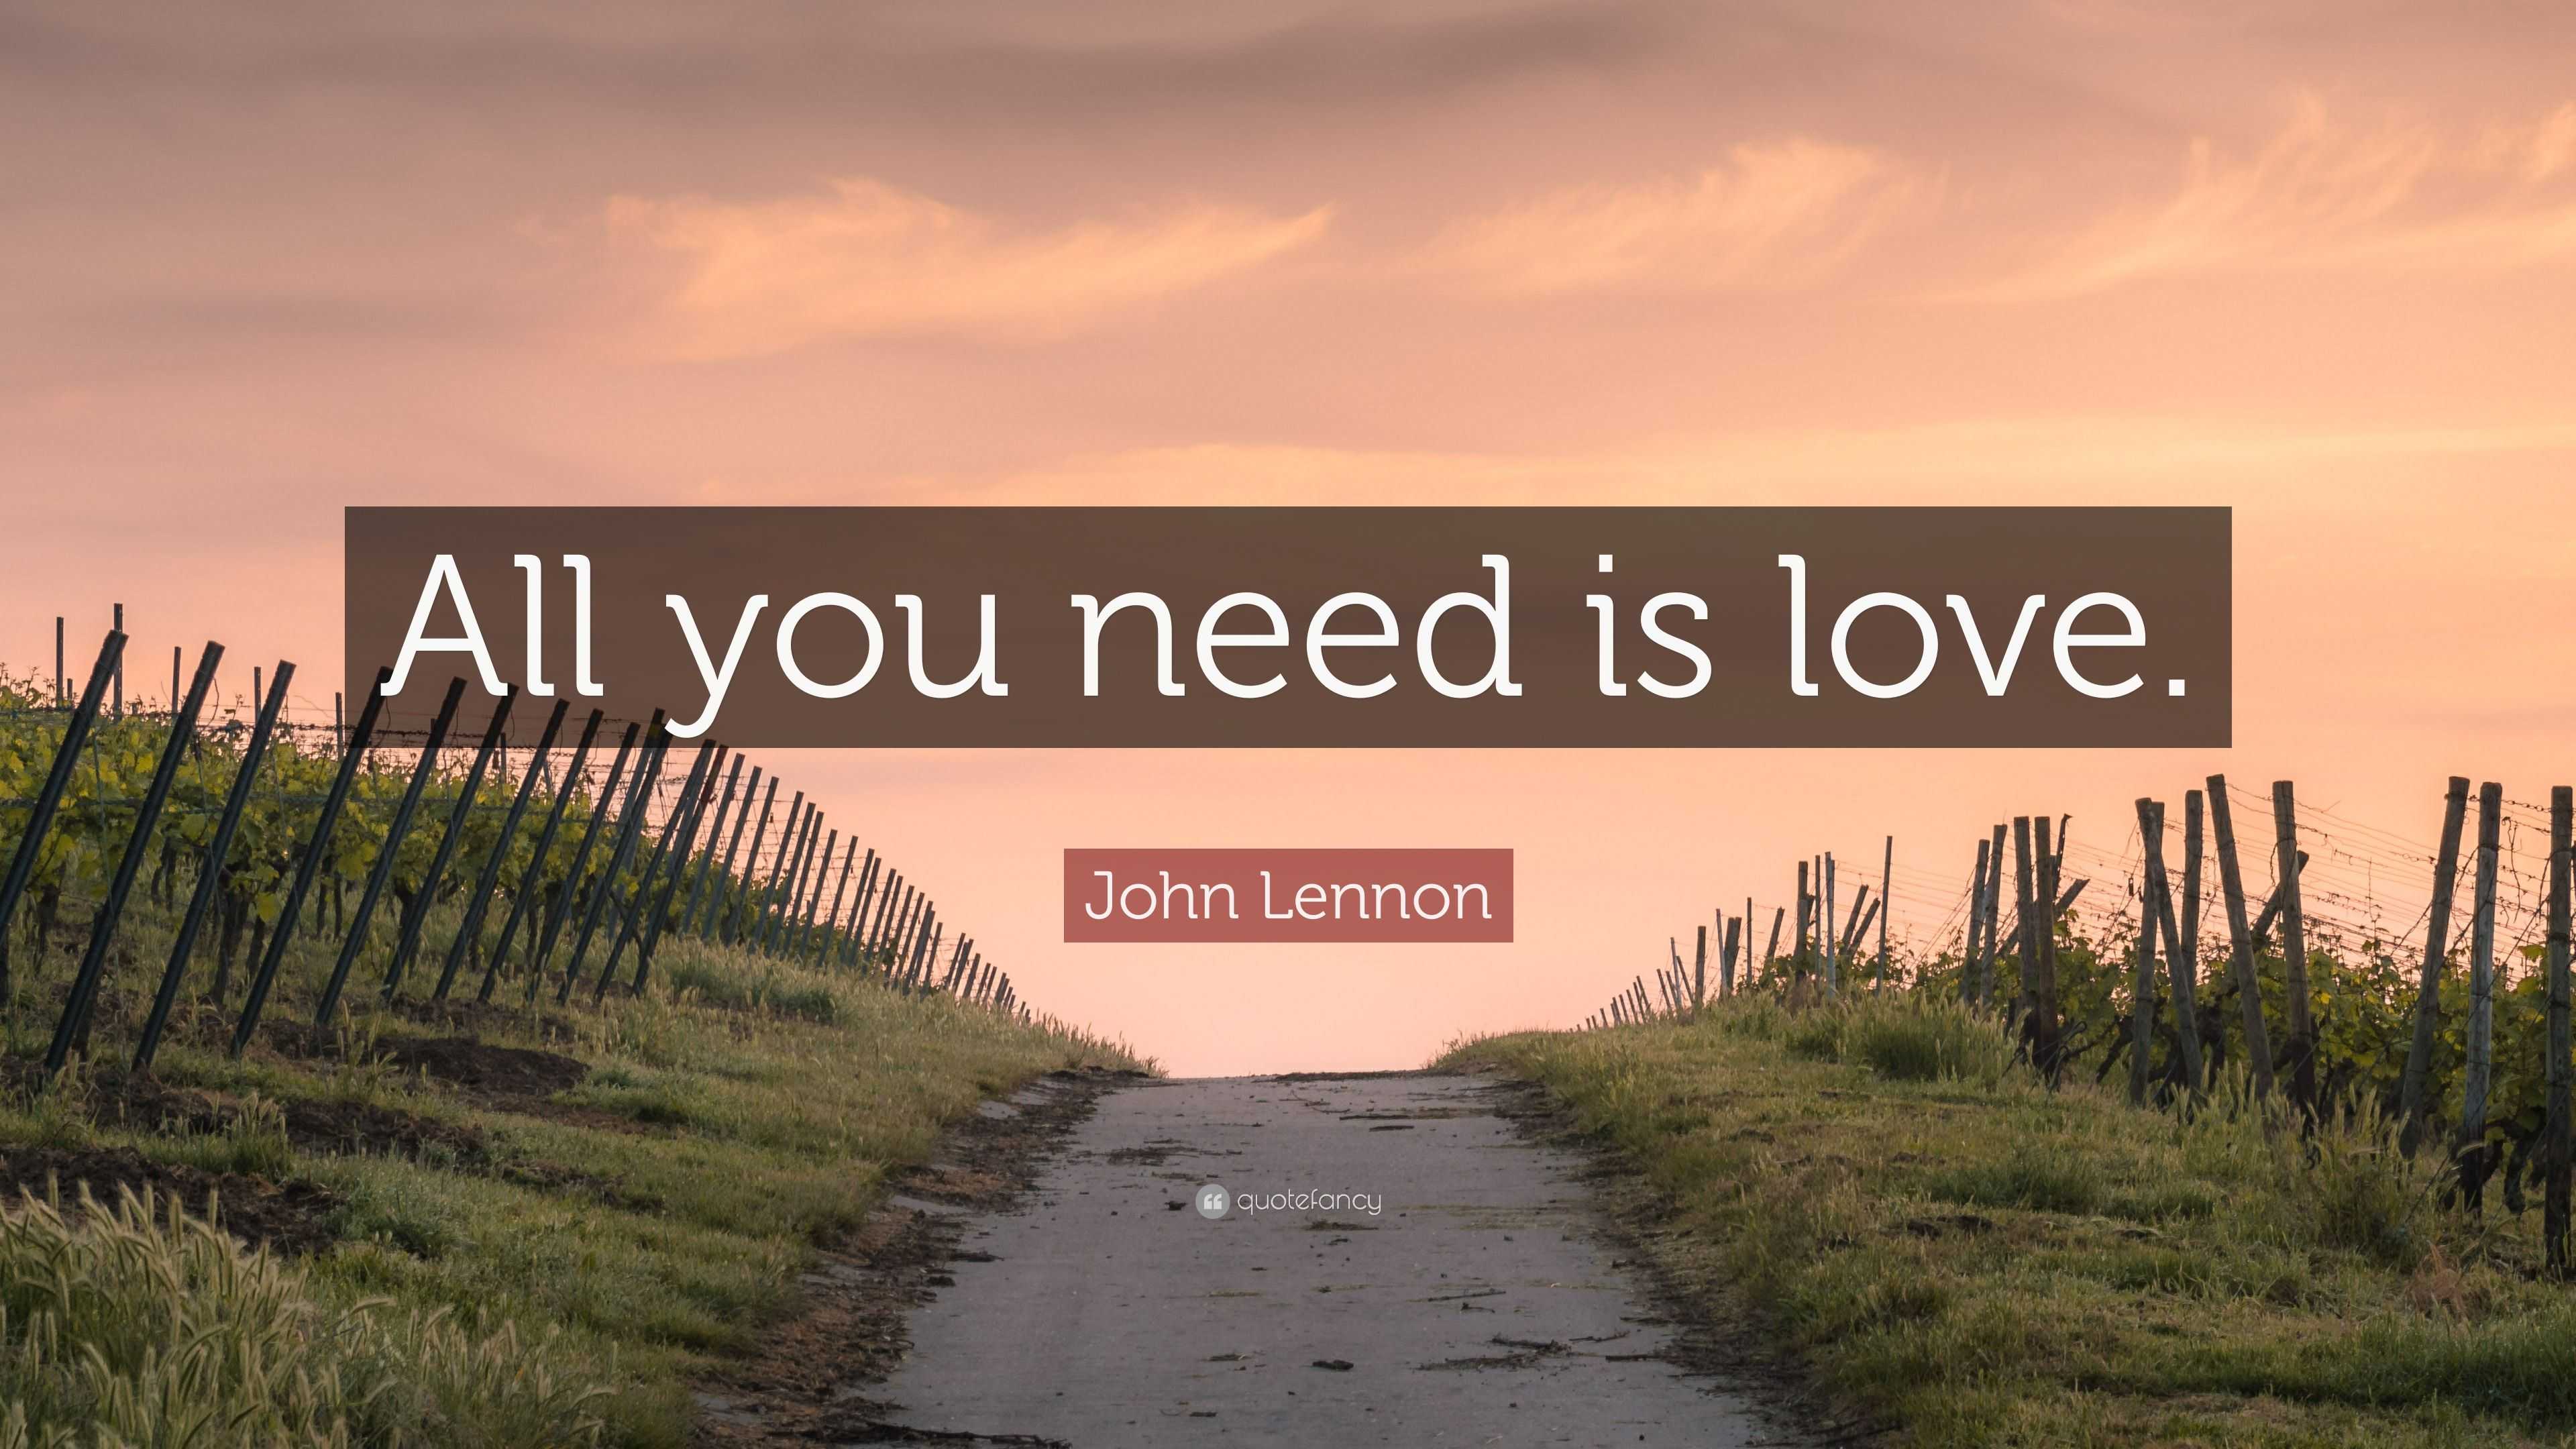 John Lennon Quote: "All you need is love."